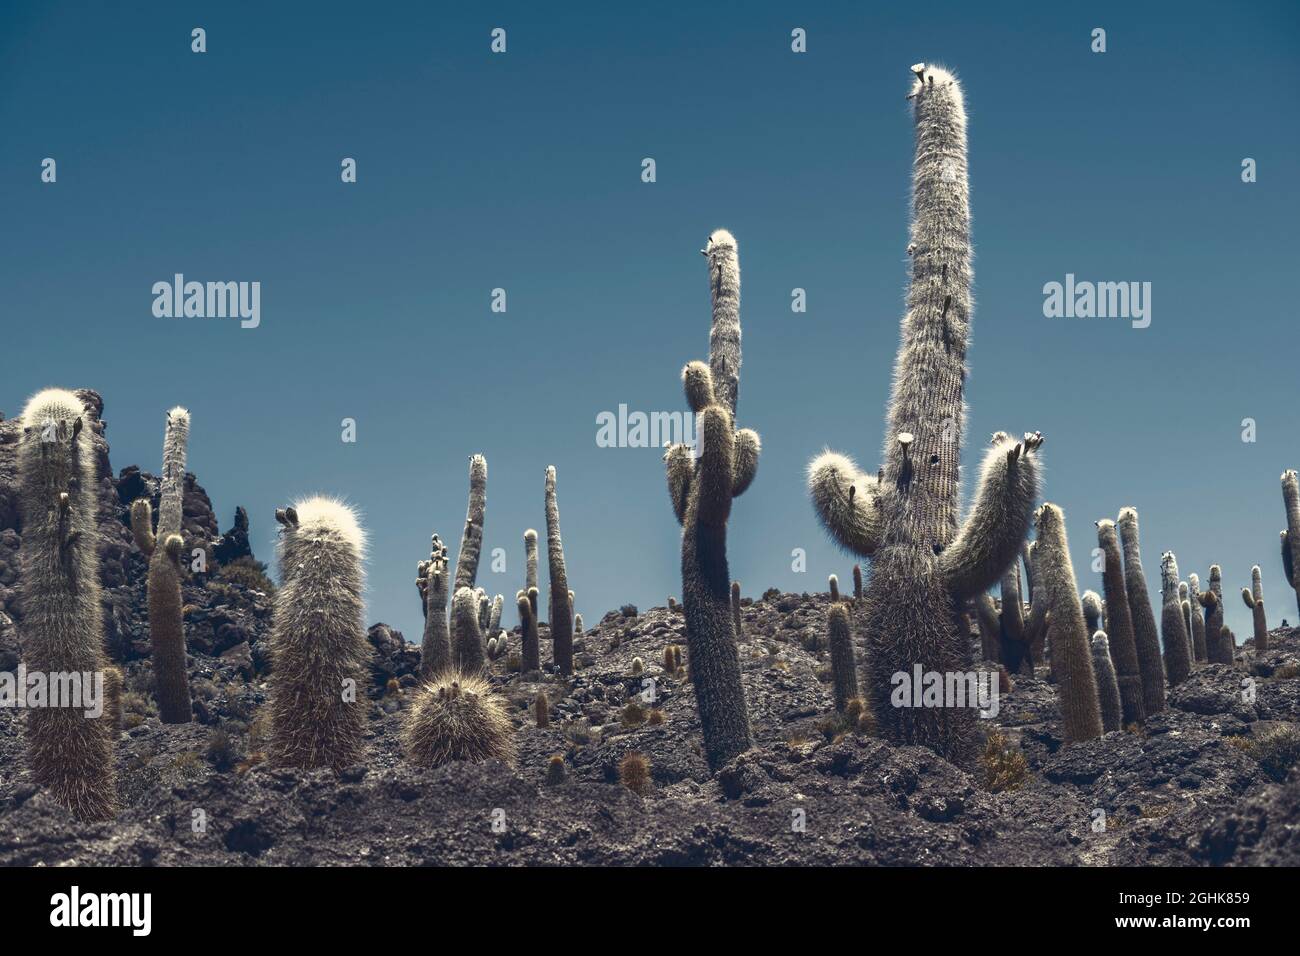 many big cactuses by night in Bolivia Stock Photo